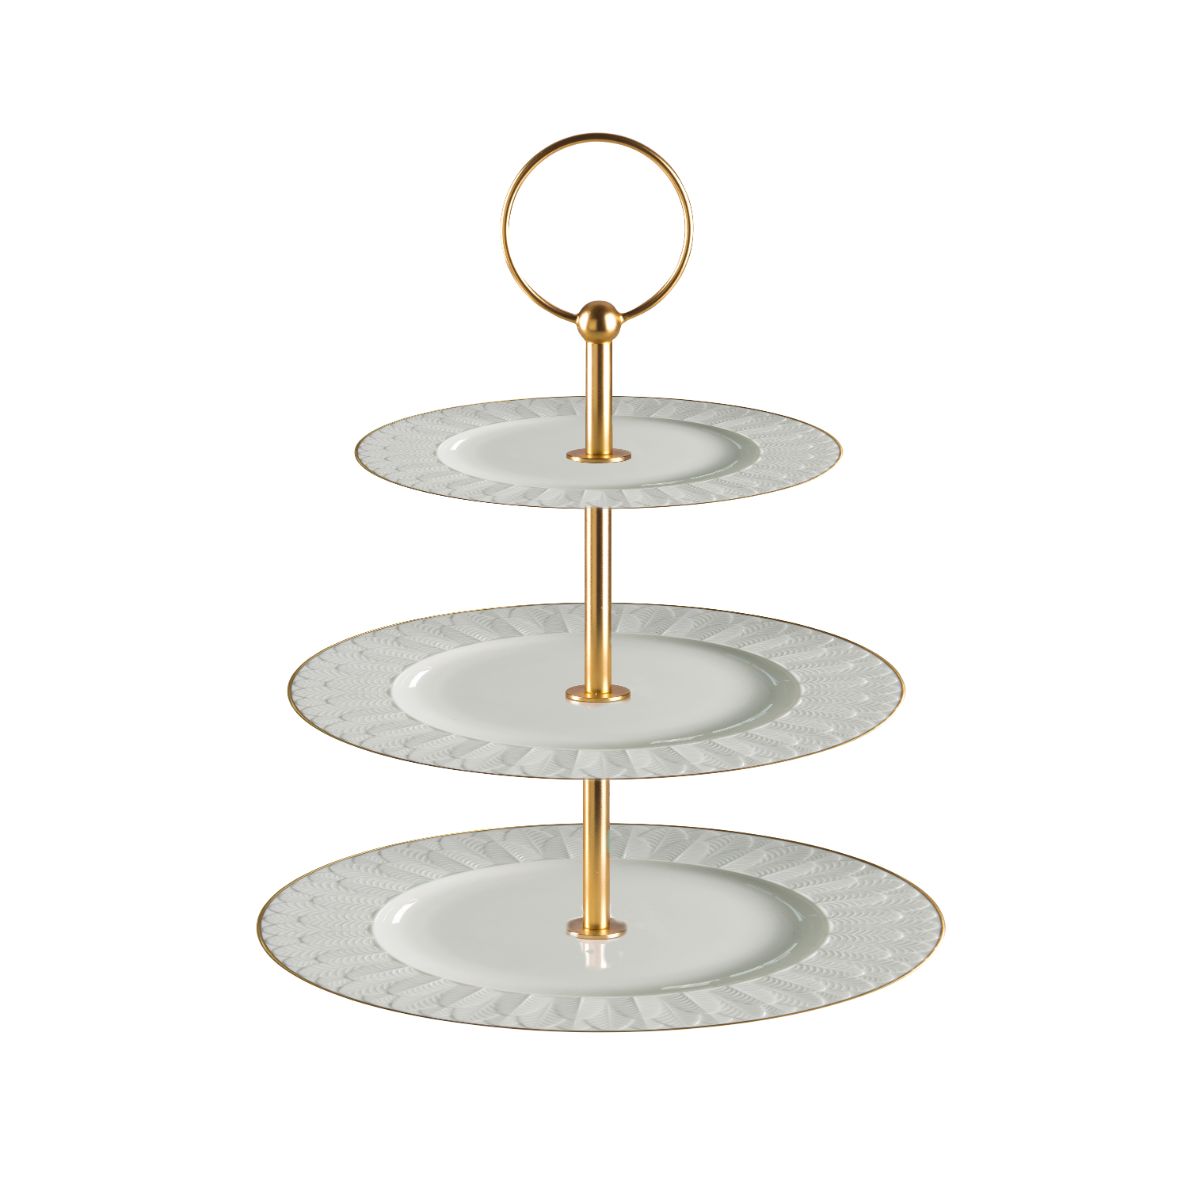 Peacock White & Gold 3 Tier Cake Stand